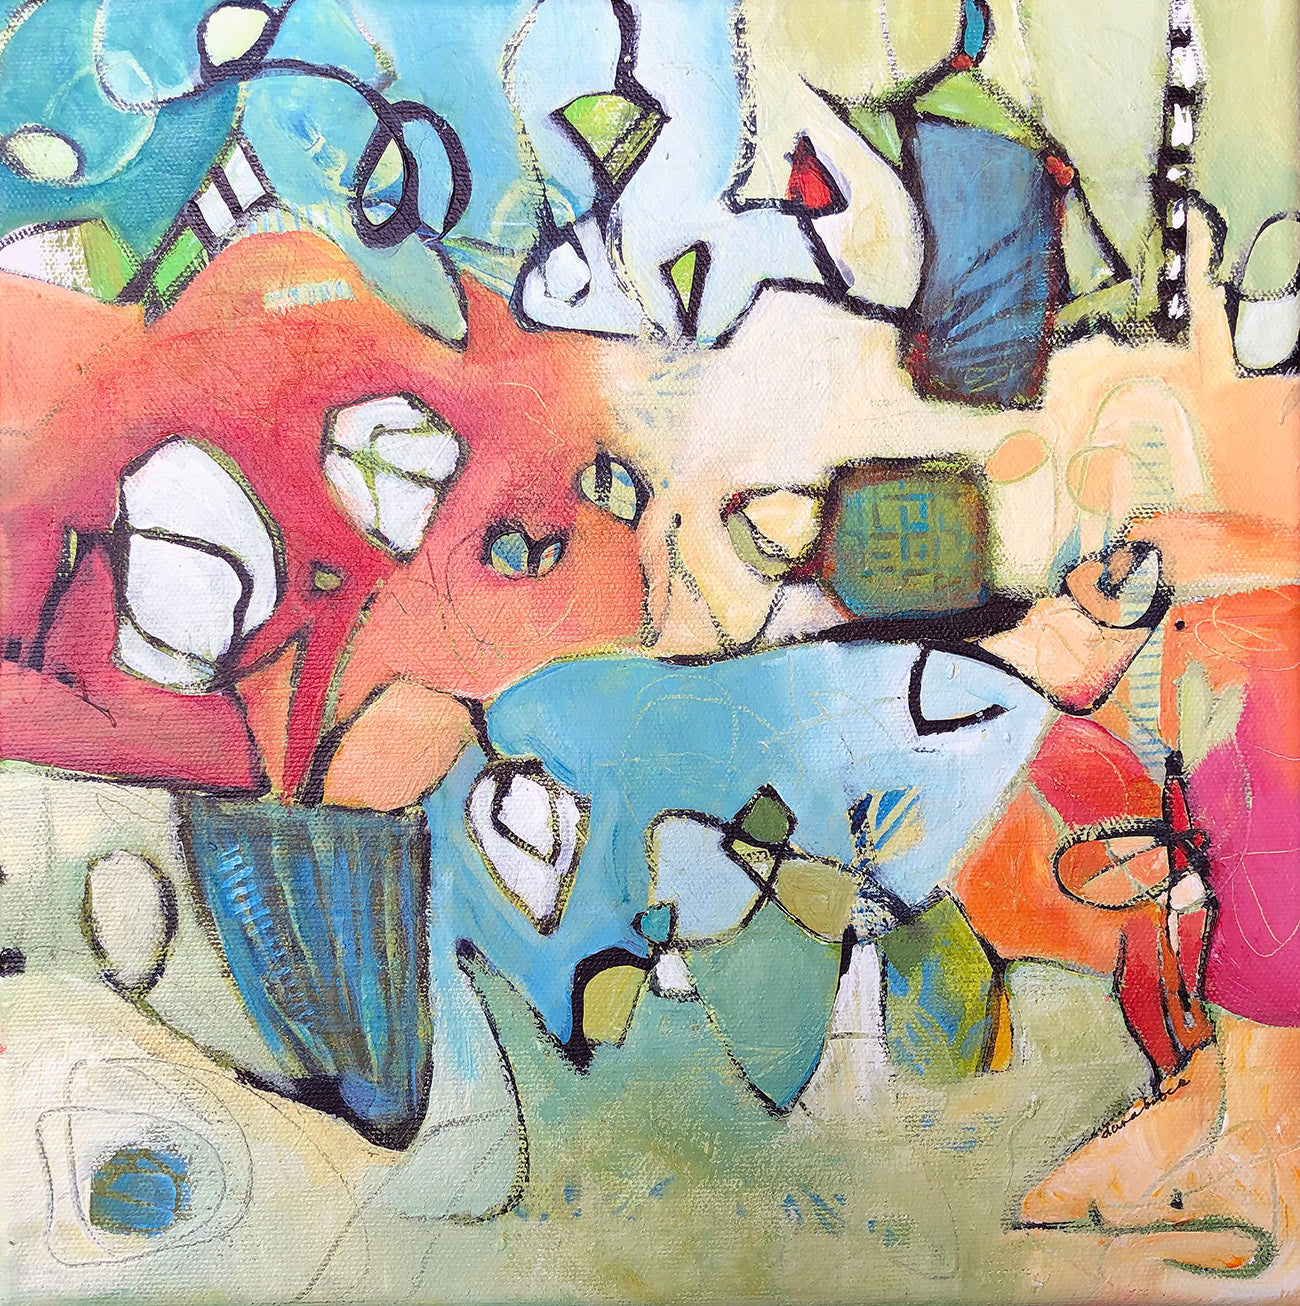 Taking a Line for a Walk - Acrylic on Canvas - 12inx12inx.5in